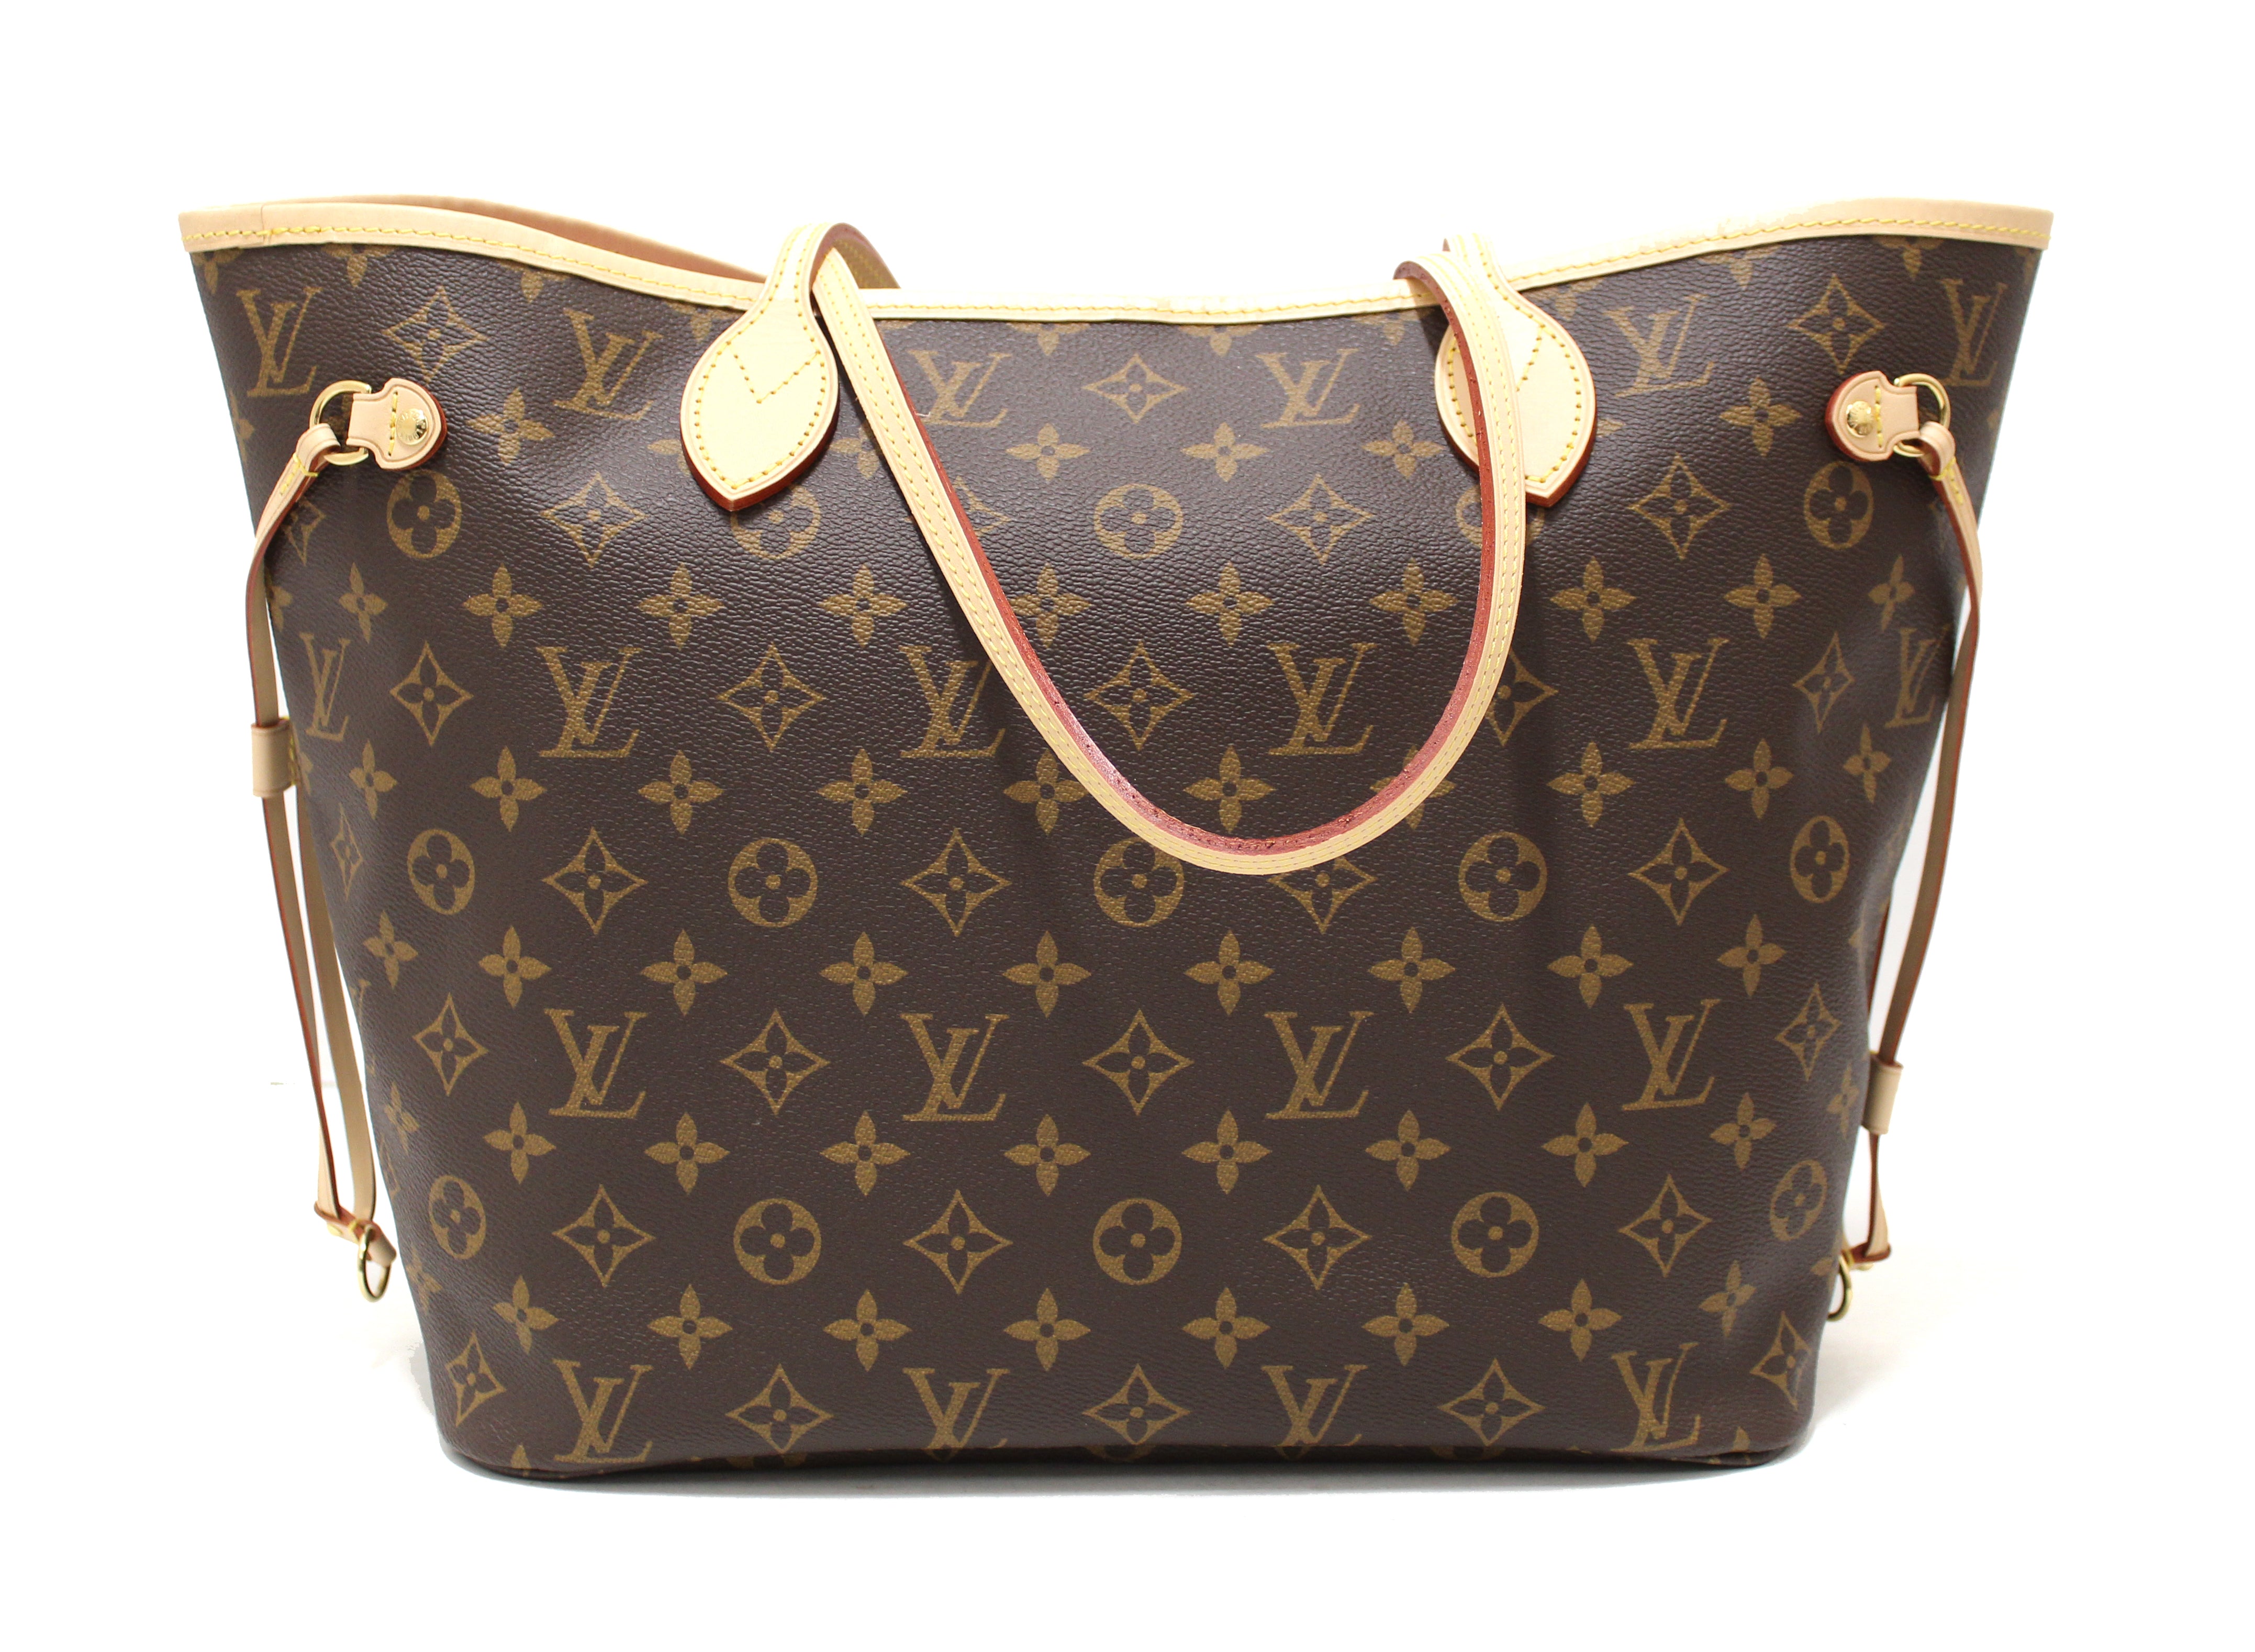 AUTHENTIC, BRAND NEW, NEVER USED, LOUIS VUITTON